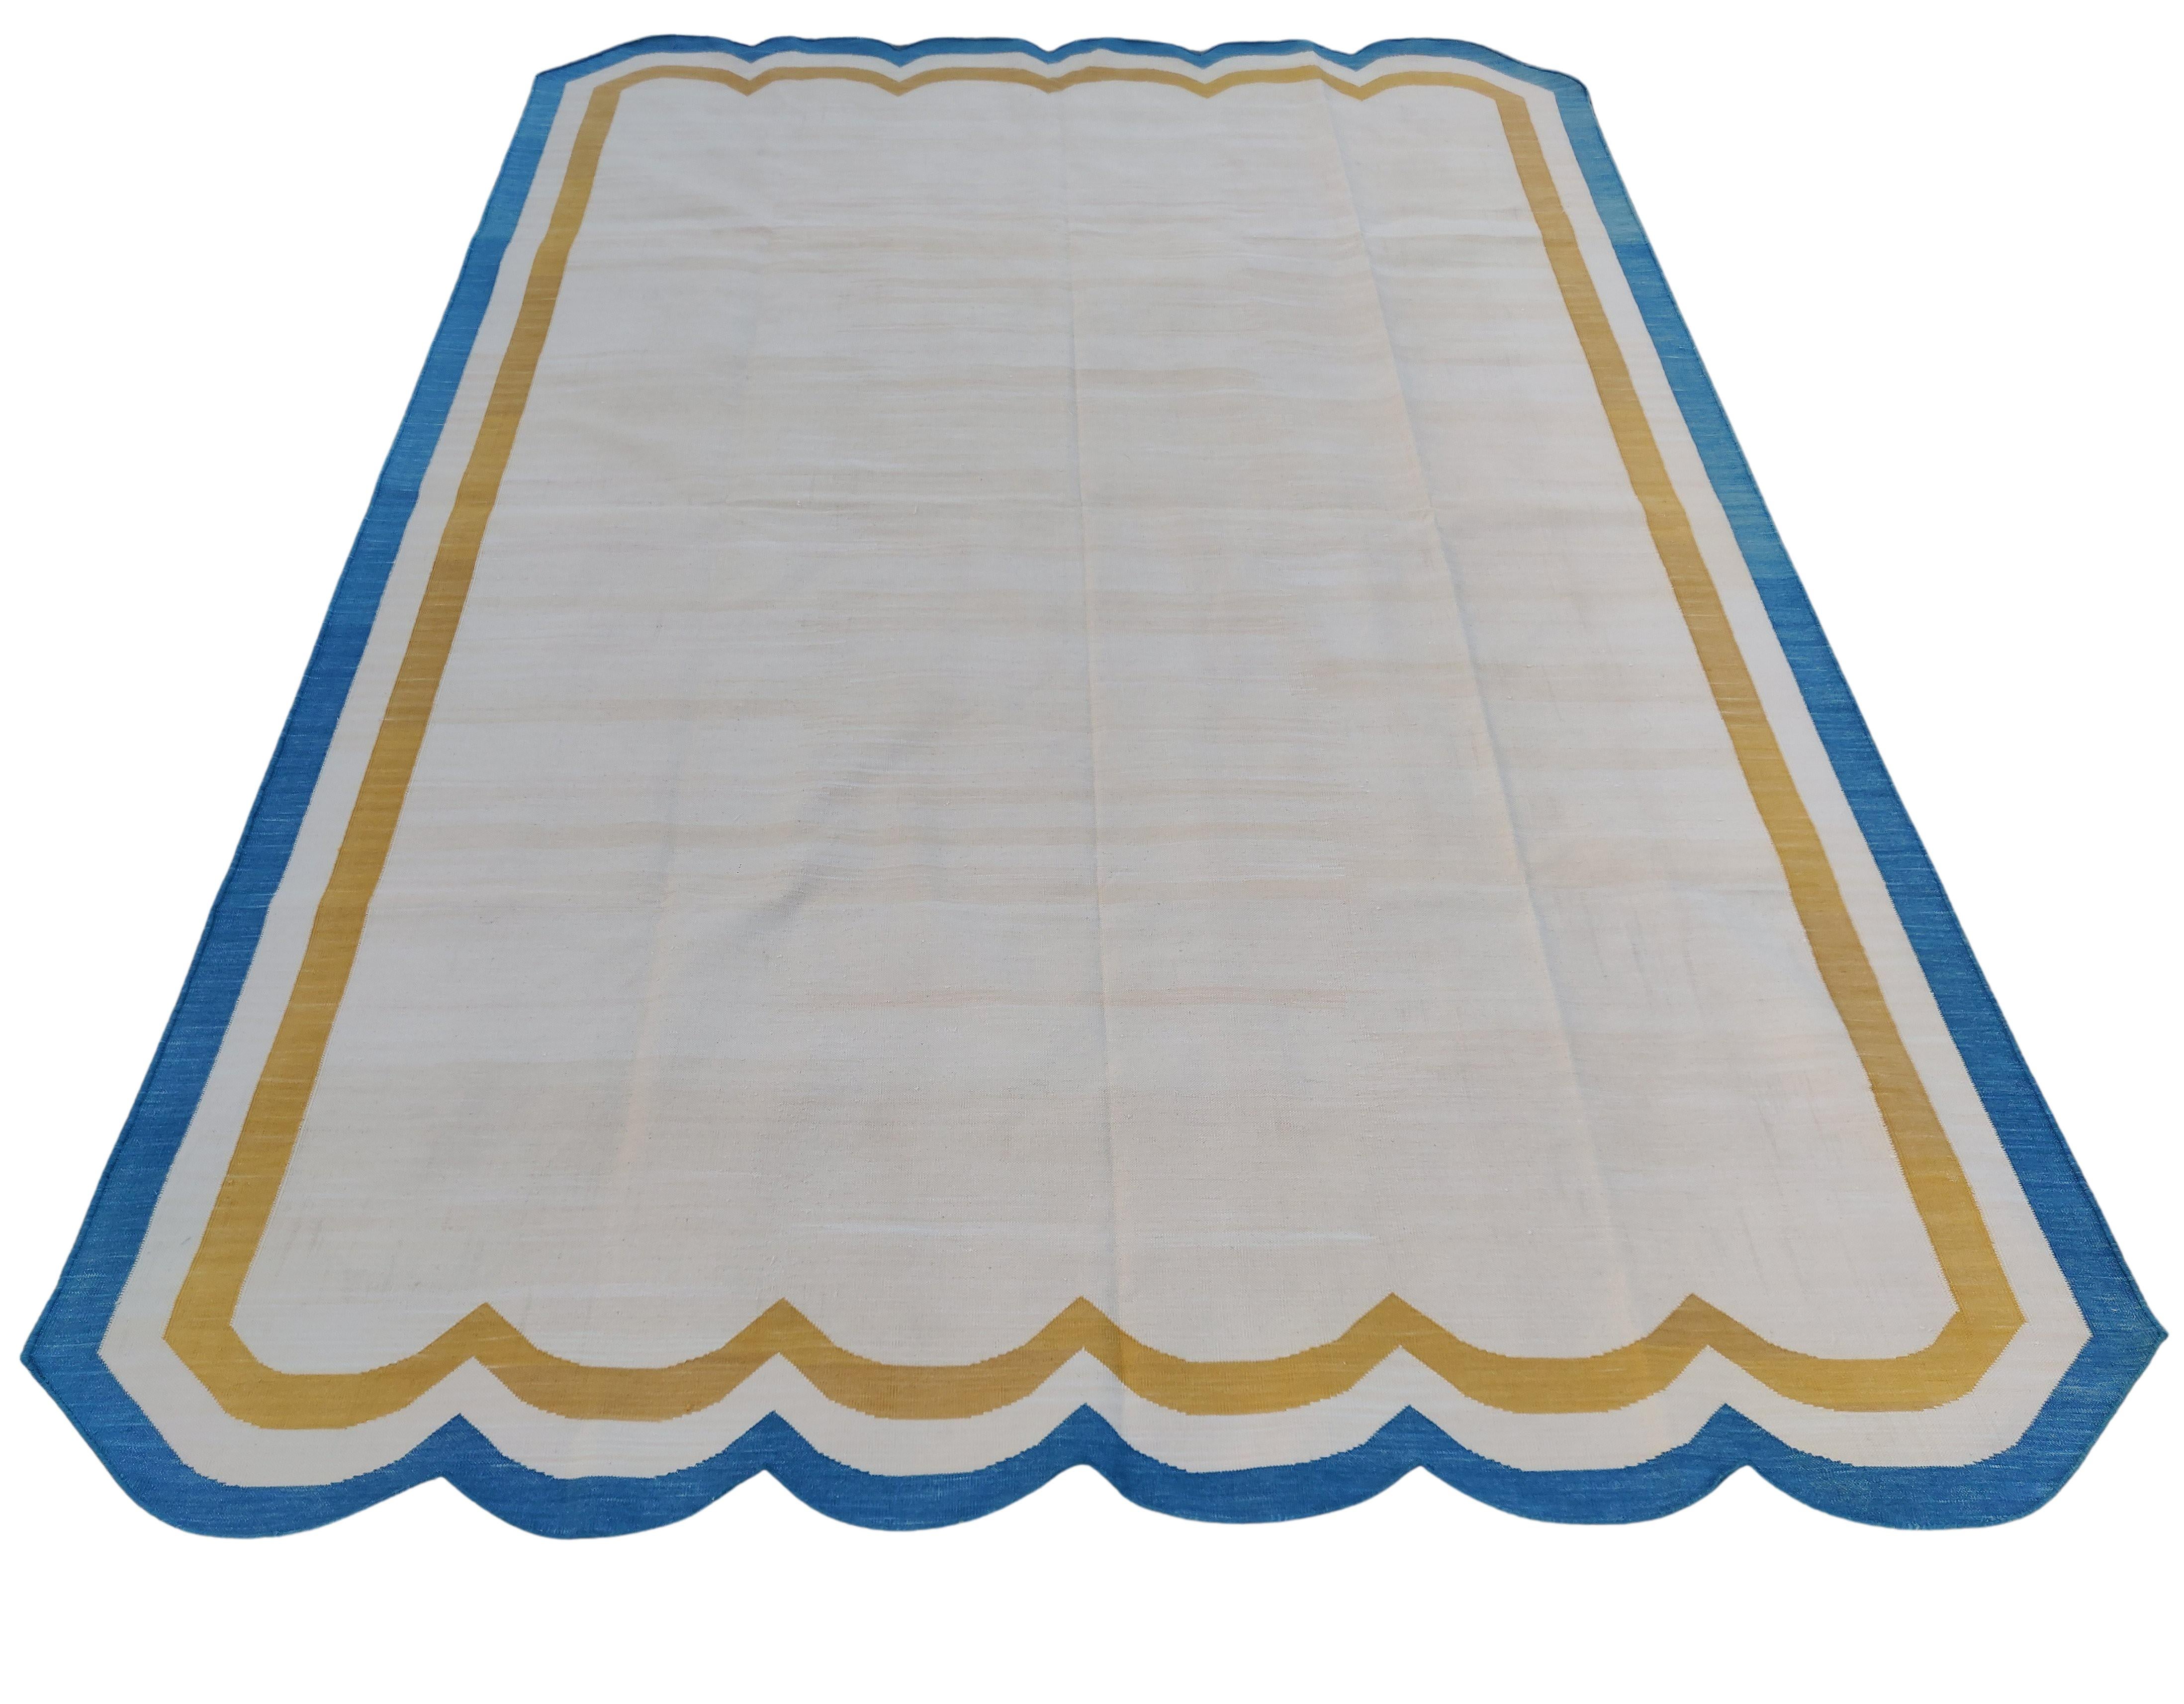 Hand-Woven Handmade Cotton Area Flat Weave Rug, 6x9 Cream And Blue Scalloped Kilim Dhurrie For Sale